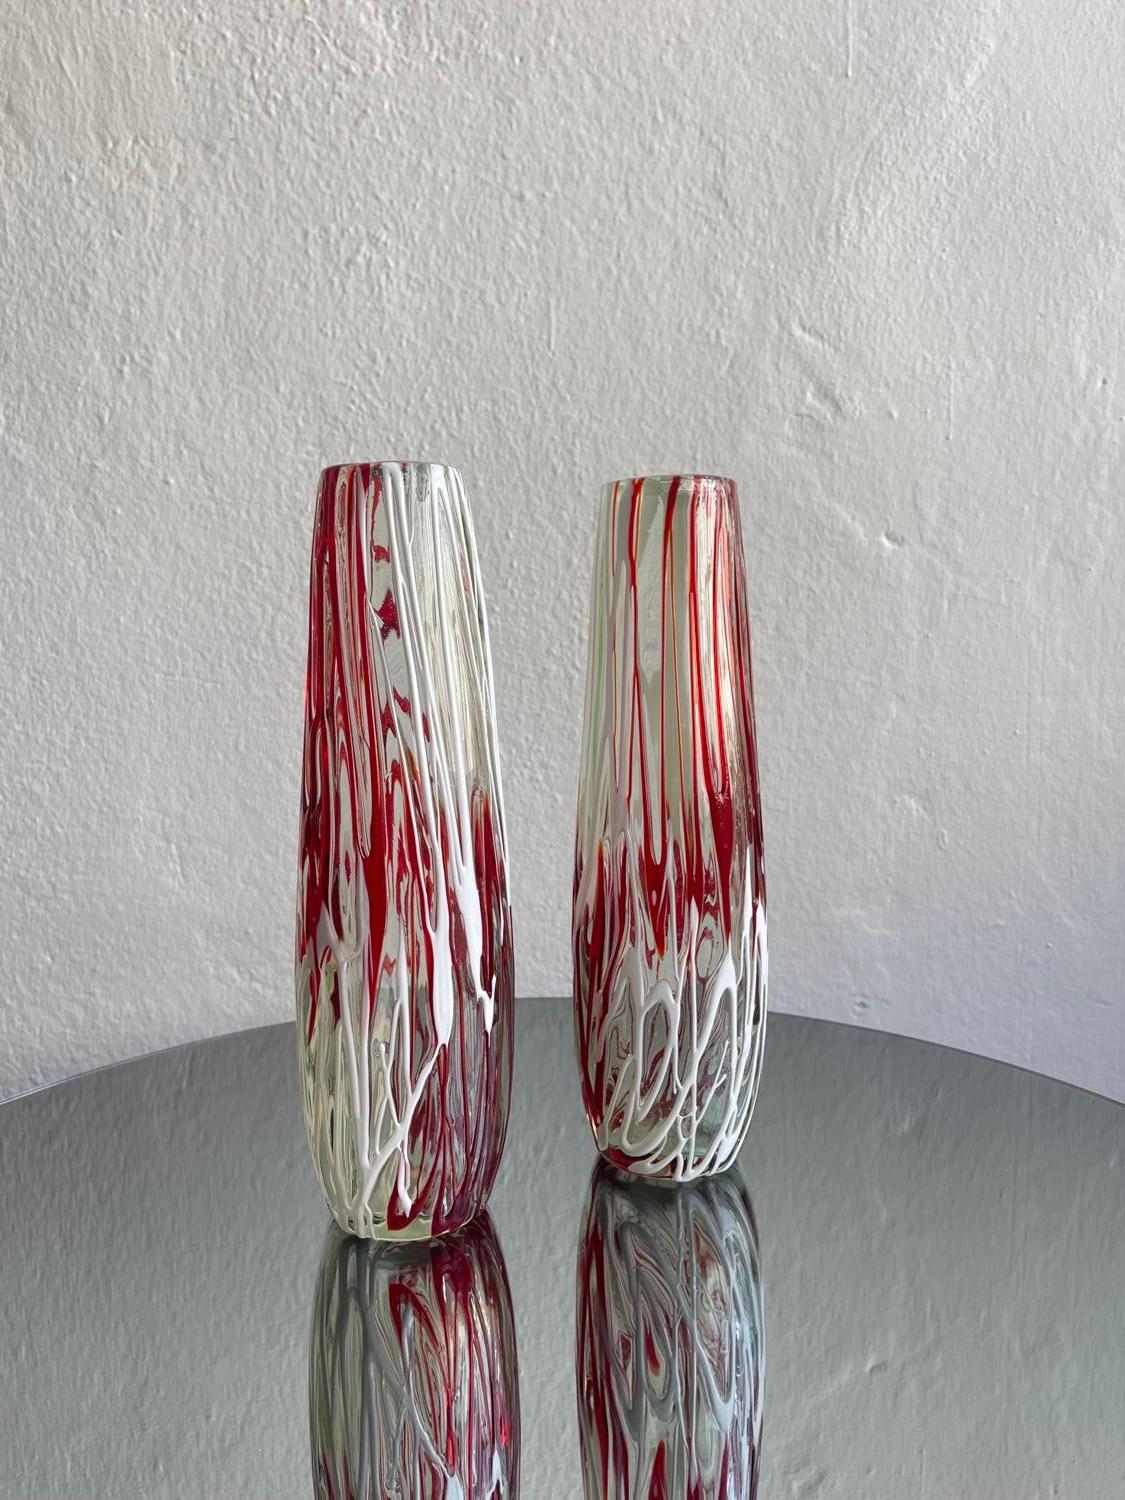 Collectible decoratives - Mid-Century Murano Vases - Red and White Glass vases

Nice and impressive pair of vintage Murano Glass vases, with a clear base and applied decorations in wires of red and white glass. Timeless, attractive and remarkably